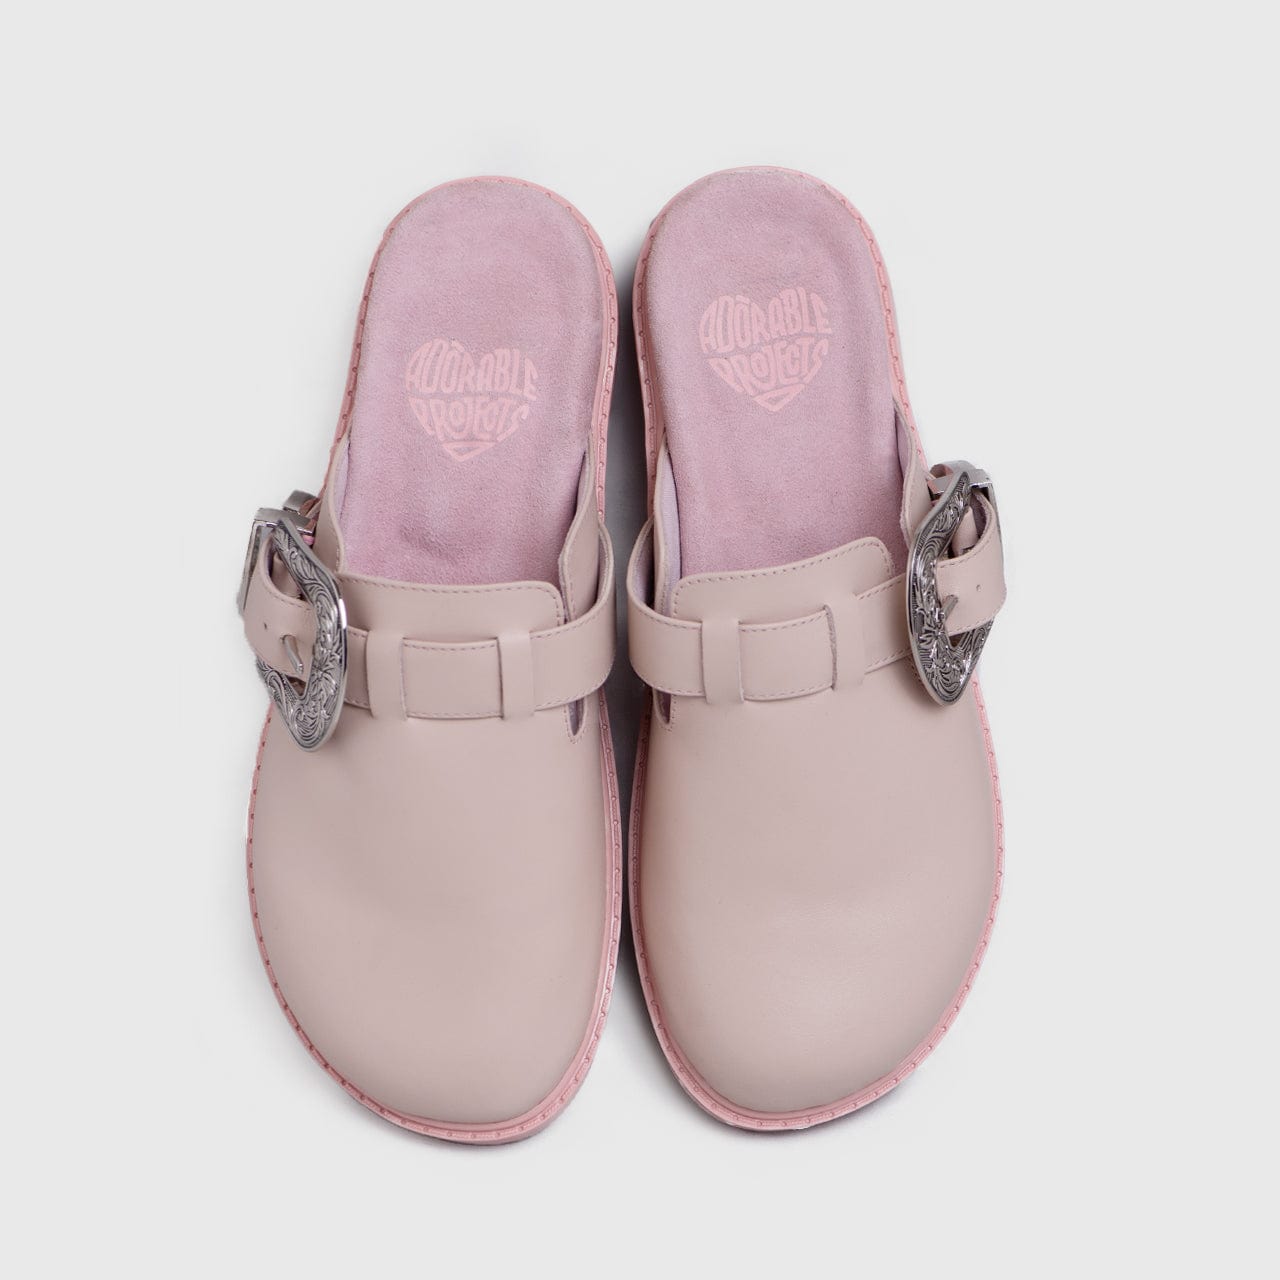 Adorable Projects Official Arben Mules Genuine Leather Whisper